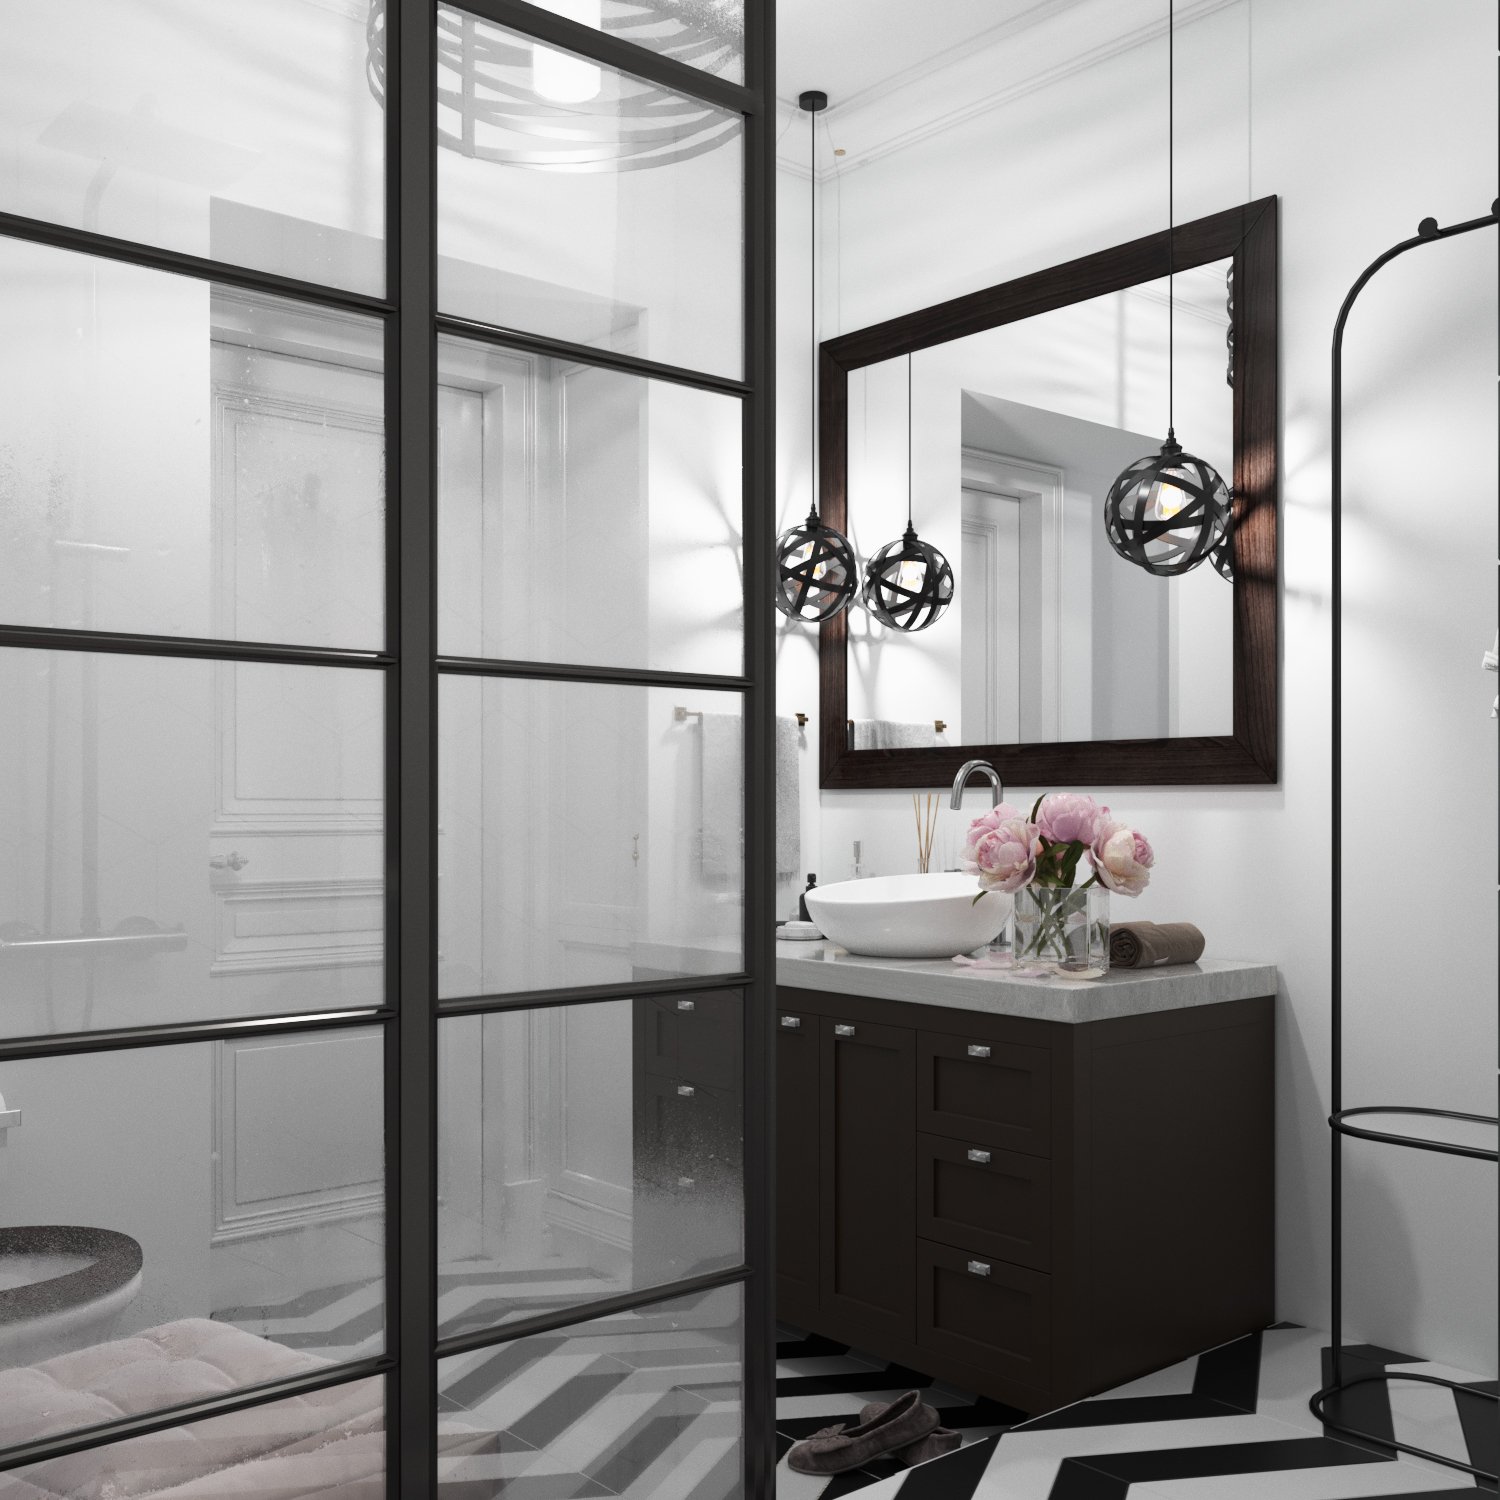 Shower room in a modern style photo